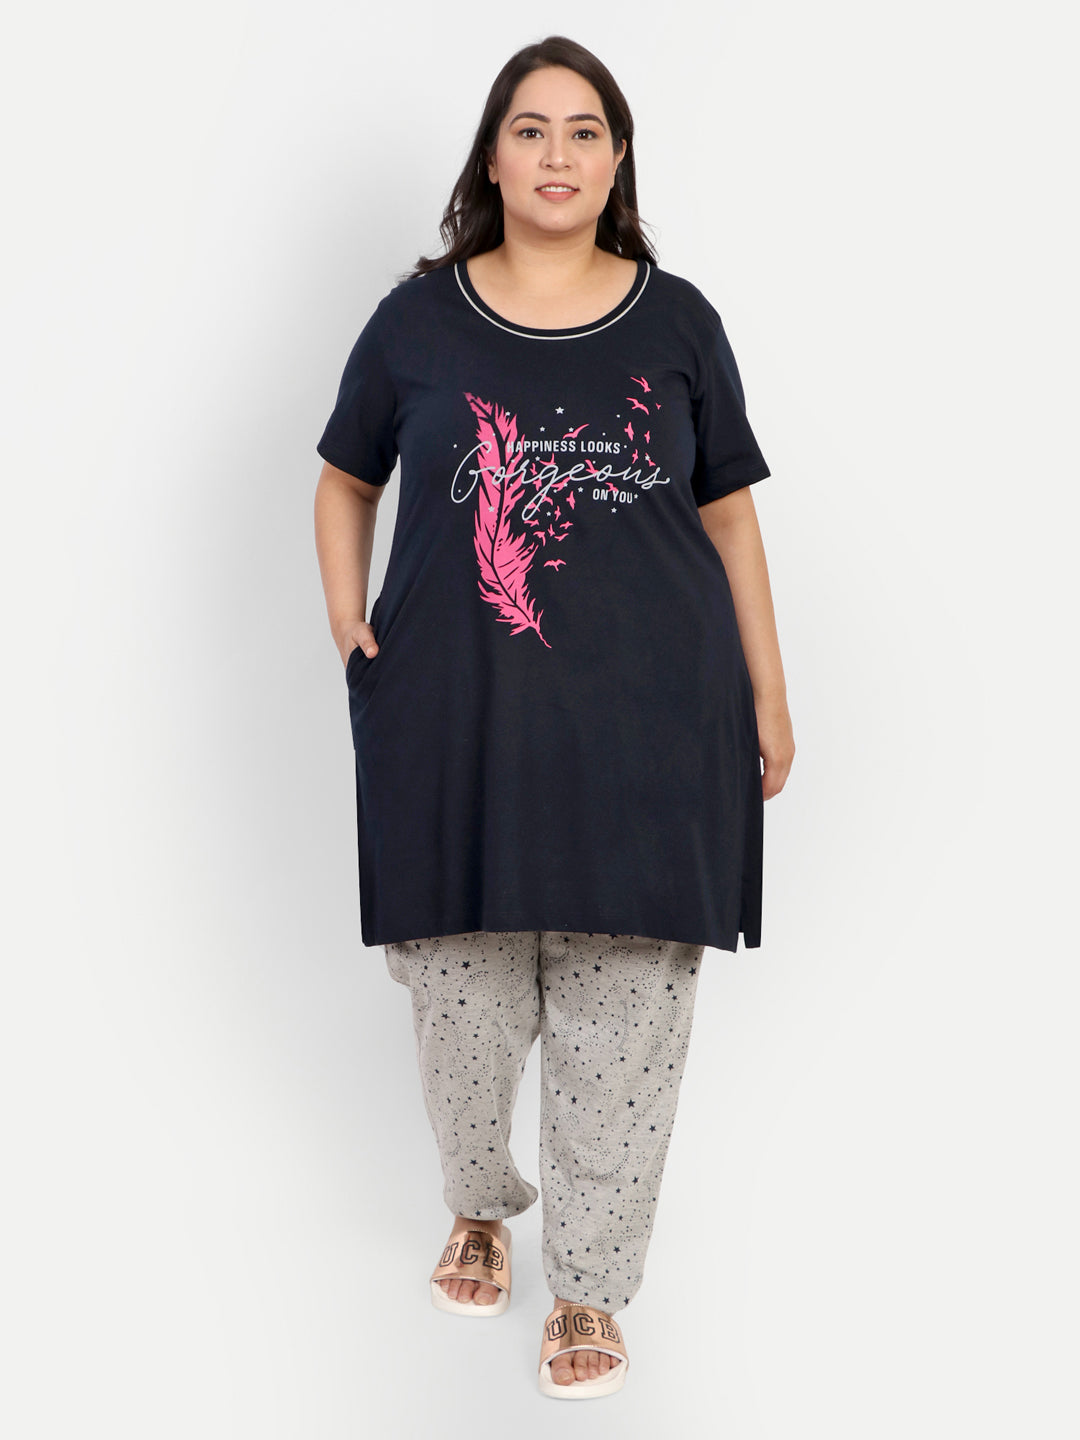 Comfortable Plus Size Cotton Nightsuit Set For Women (Long Top & Pajamas) Online In India